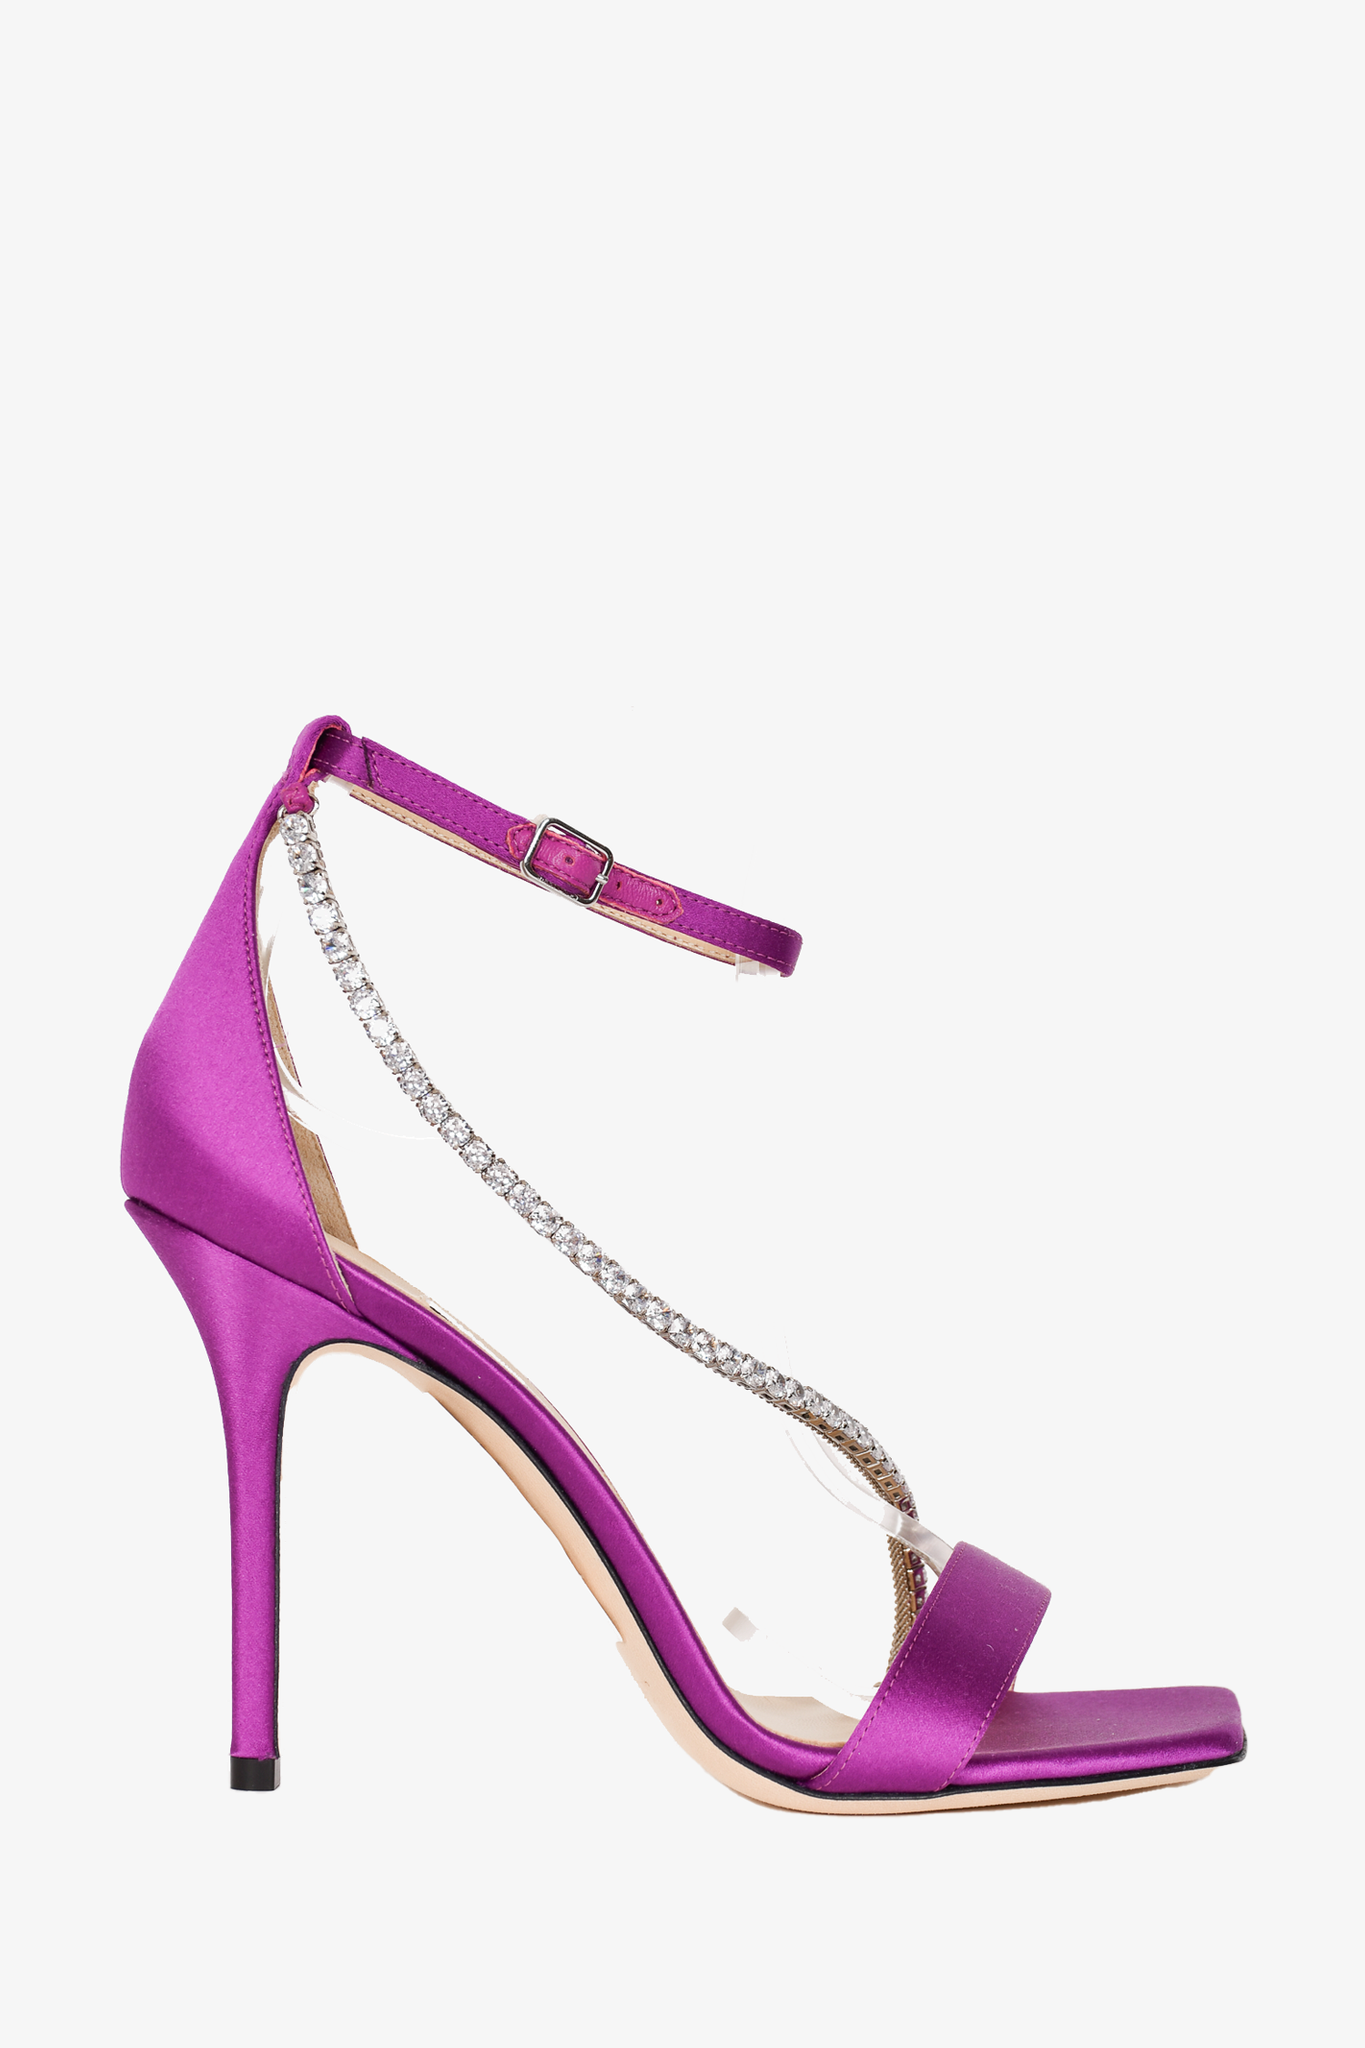 JIMMY CHOO: Saeda pumps in patent leather with rhinestones - Violet | JIMMY  CHOO high heel shoes SAEDA100BAQ online at GIGLIO.COM